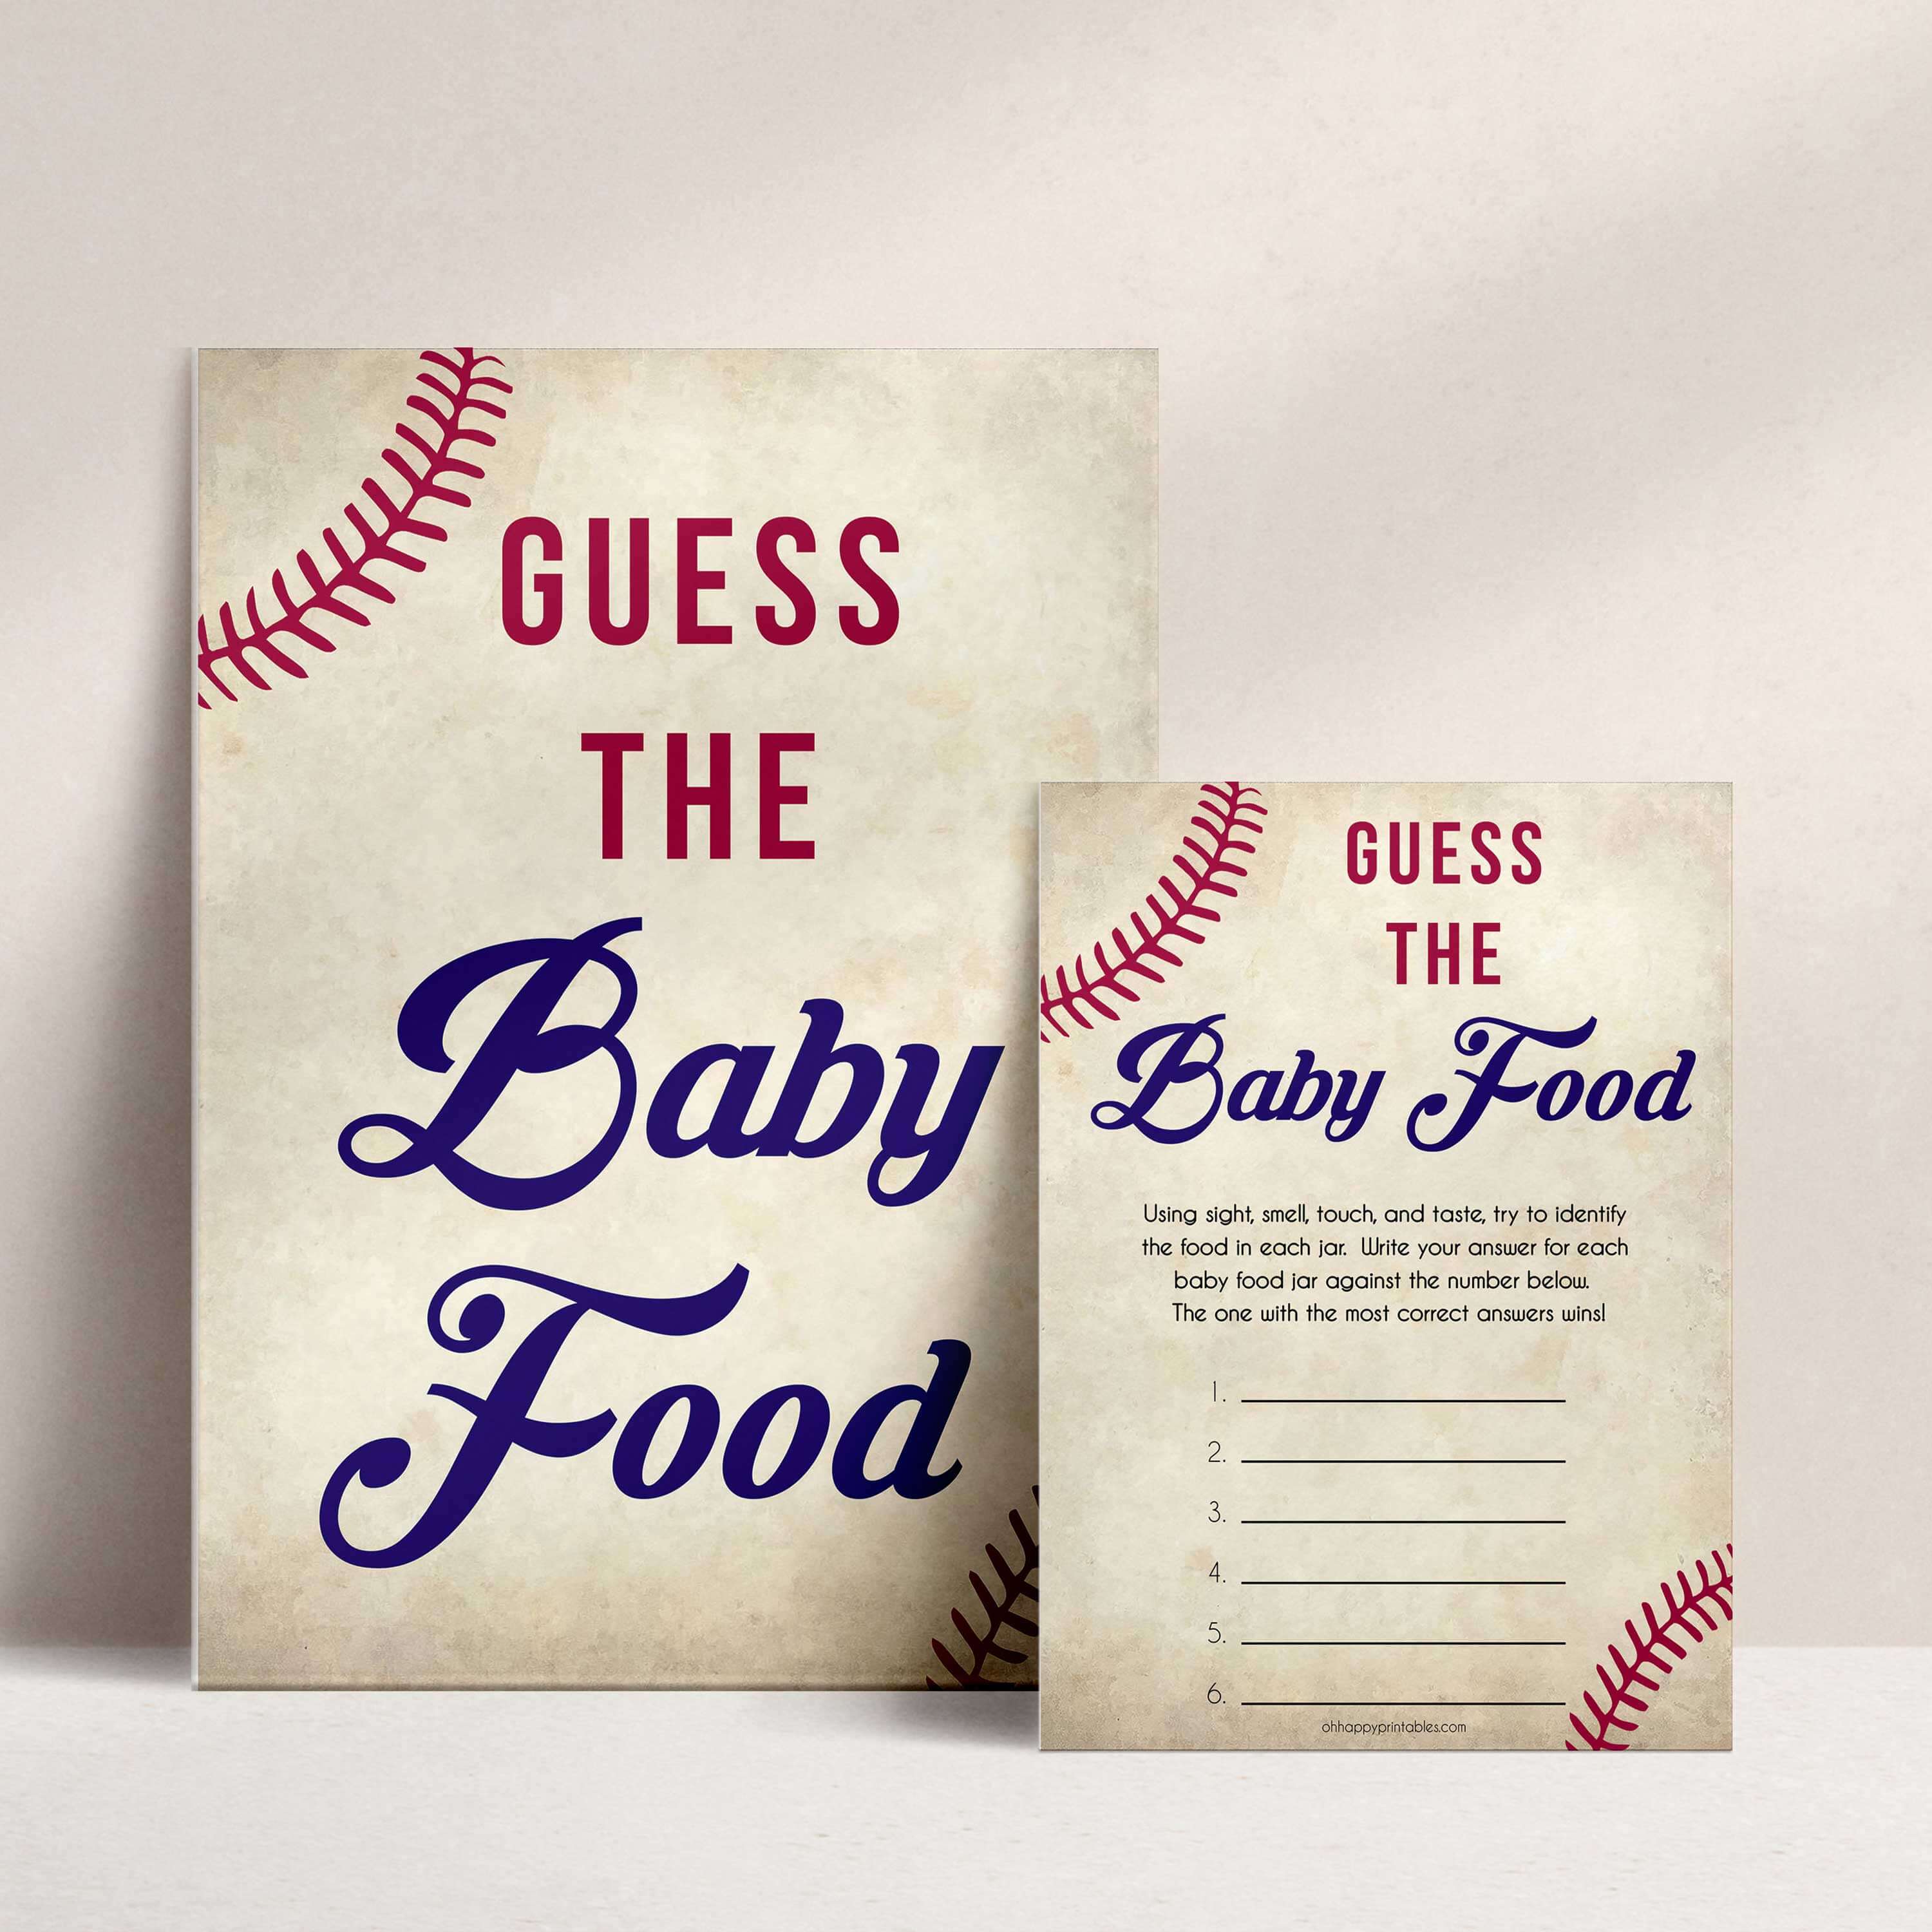 baseball guess the baby food game, baby shower games, guess the baby food game, printable baby shower games, fun baby shower games, popular baby shower games